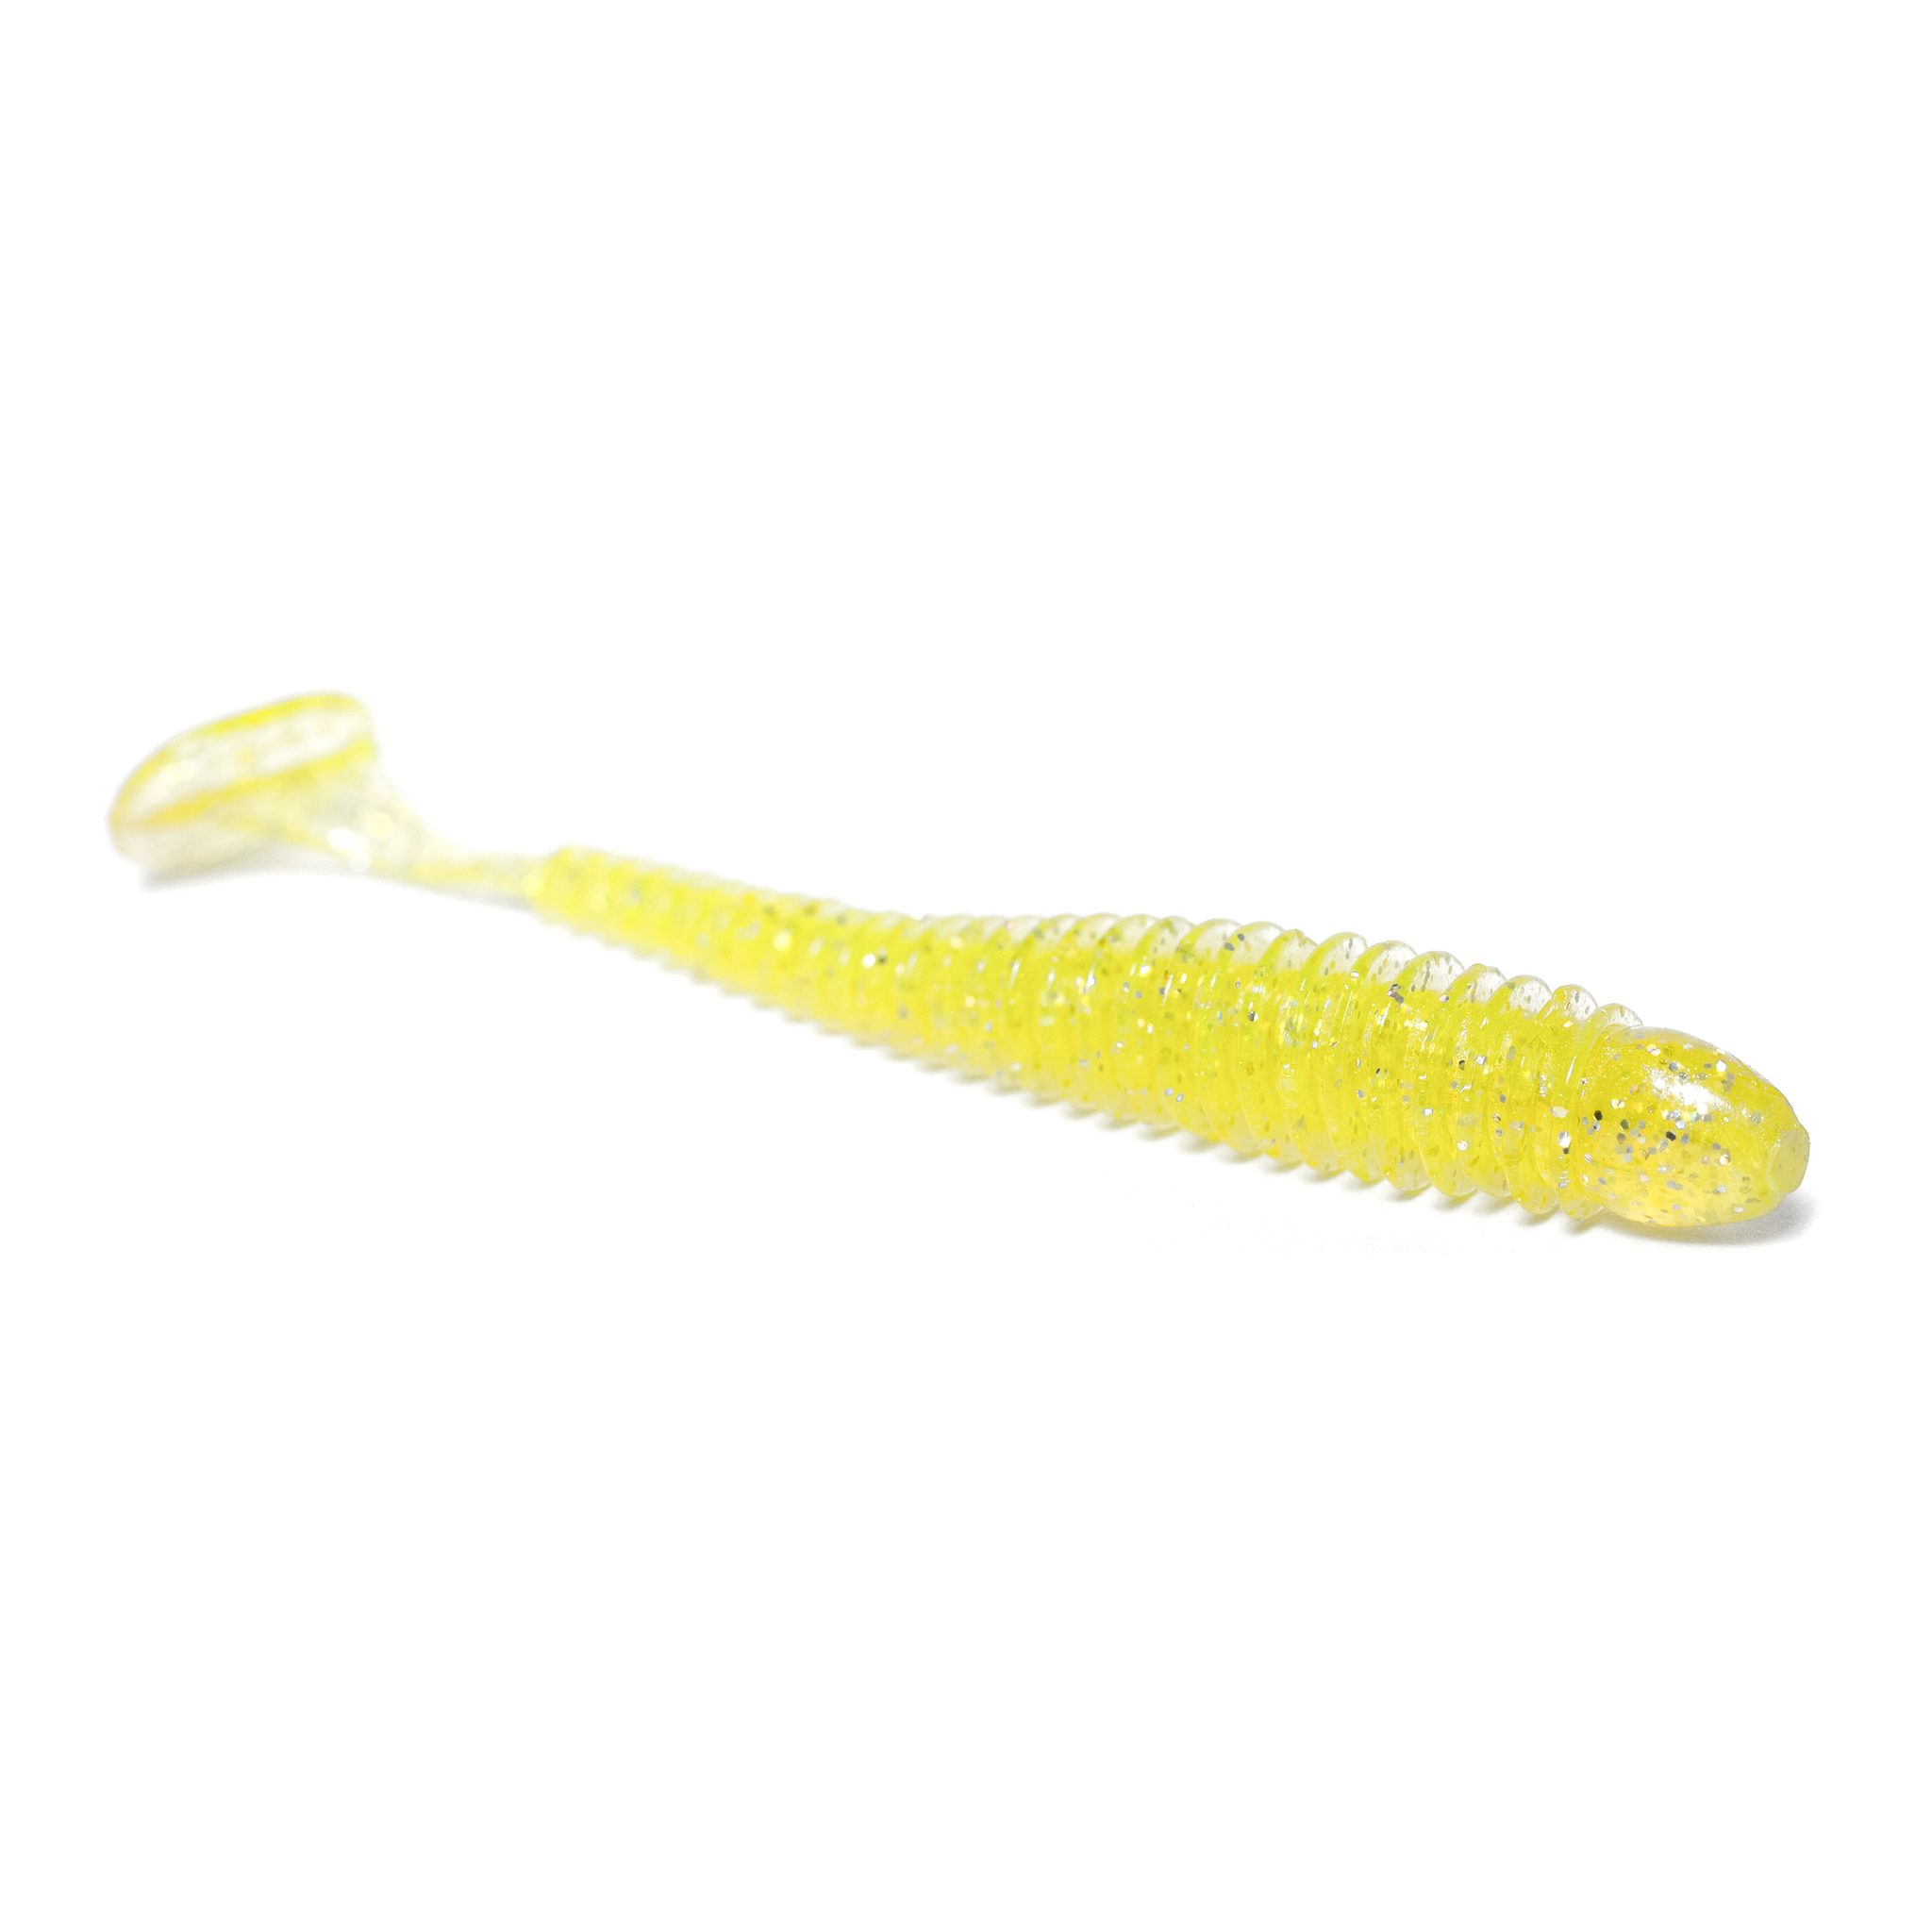  Soft Plastiс Mold Lure Making Injection Molds Fishing Lures  Keitech Easy Shiner 3'' Two Cavity : Sports & Outdoors